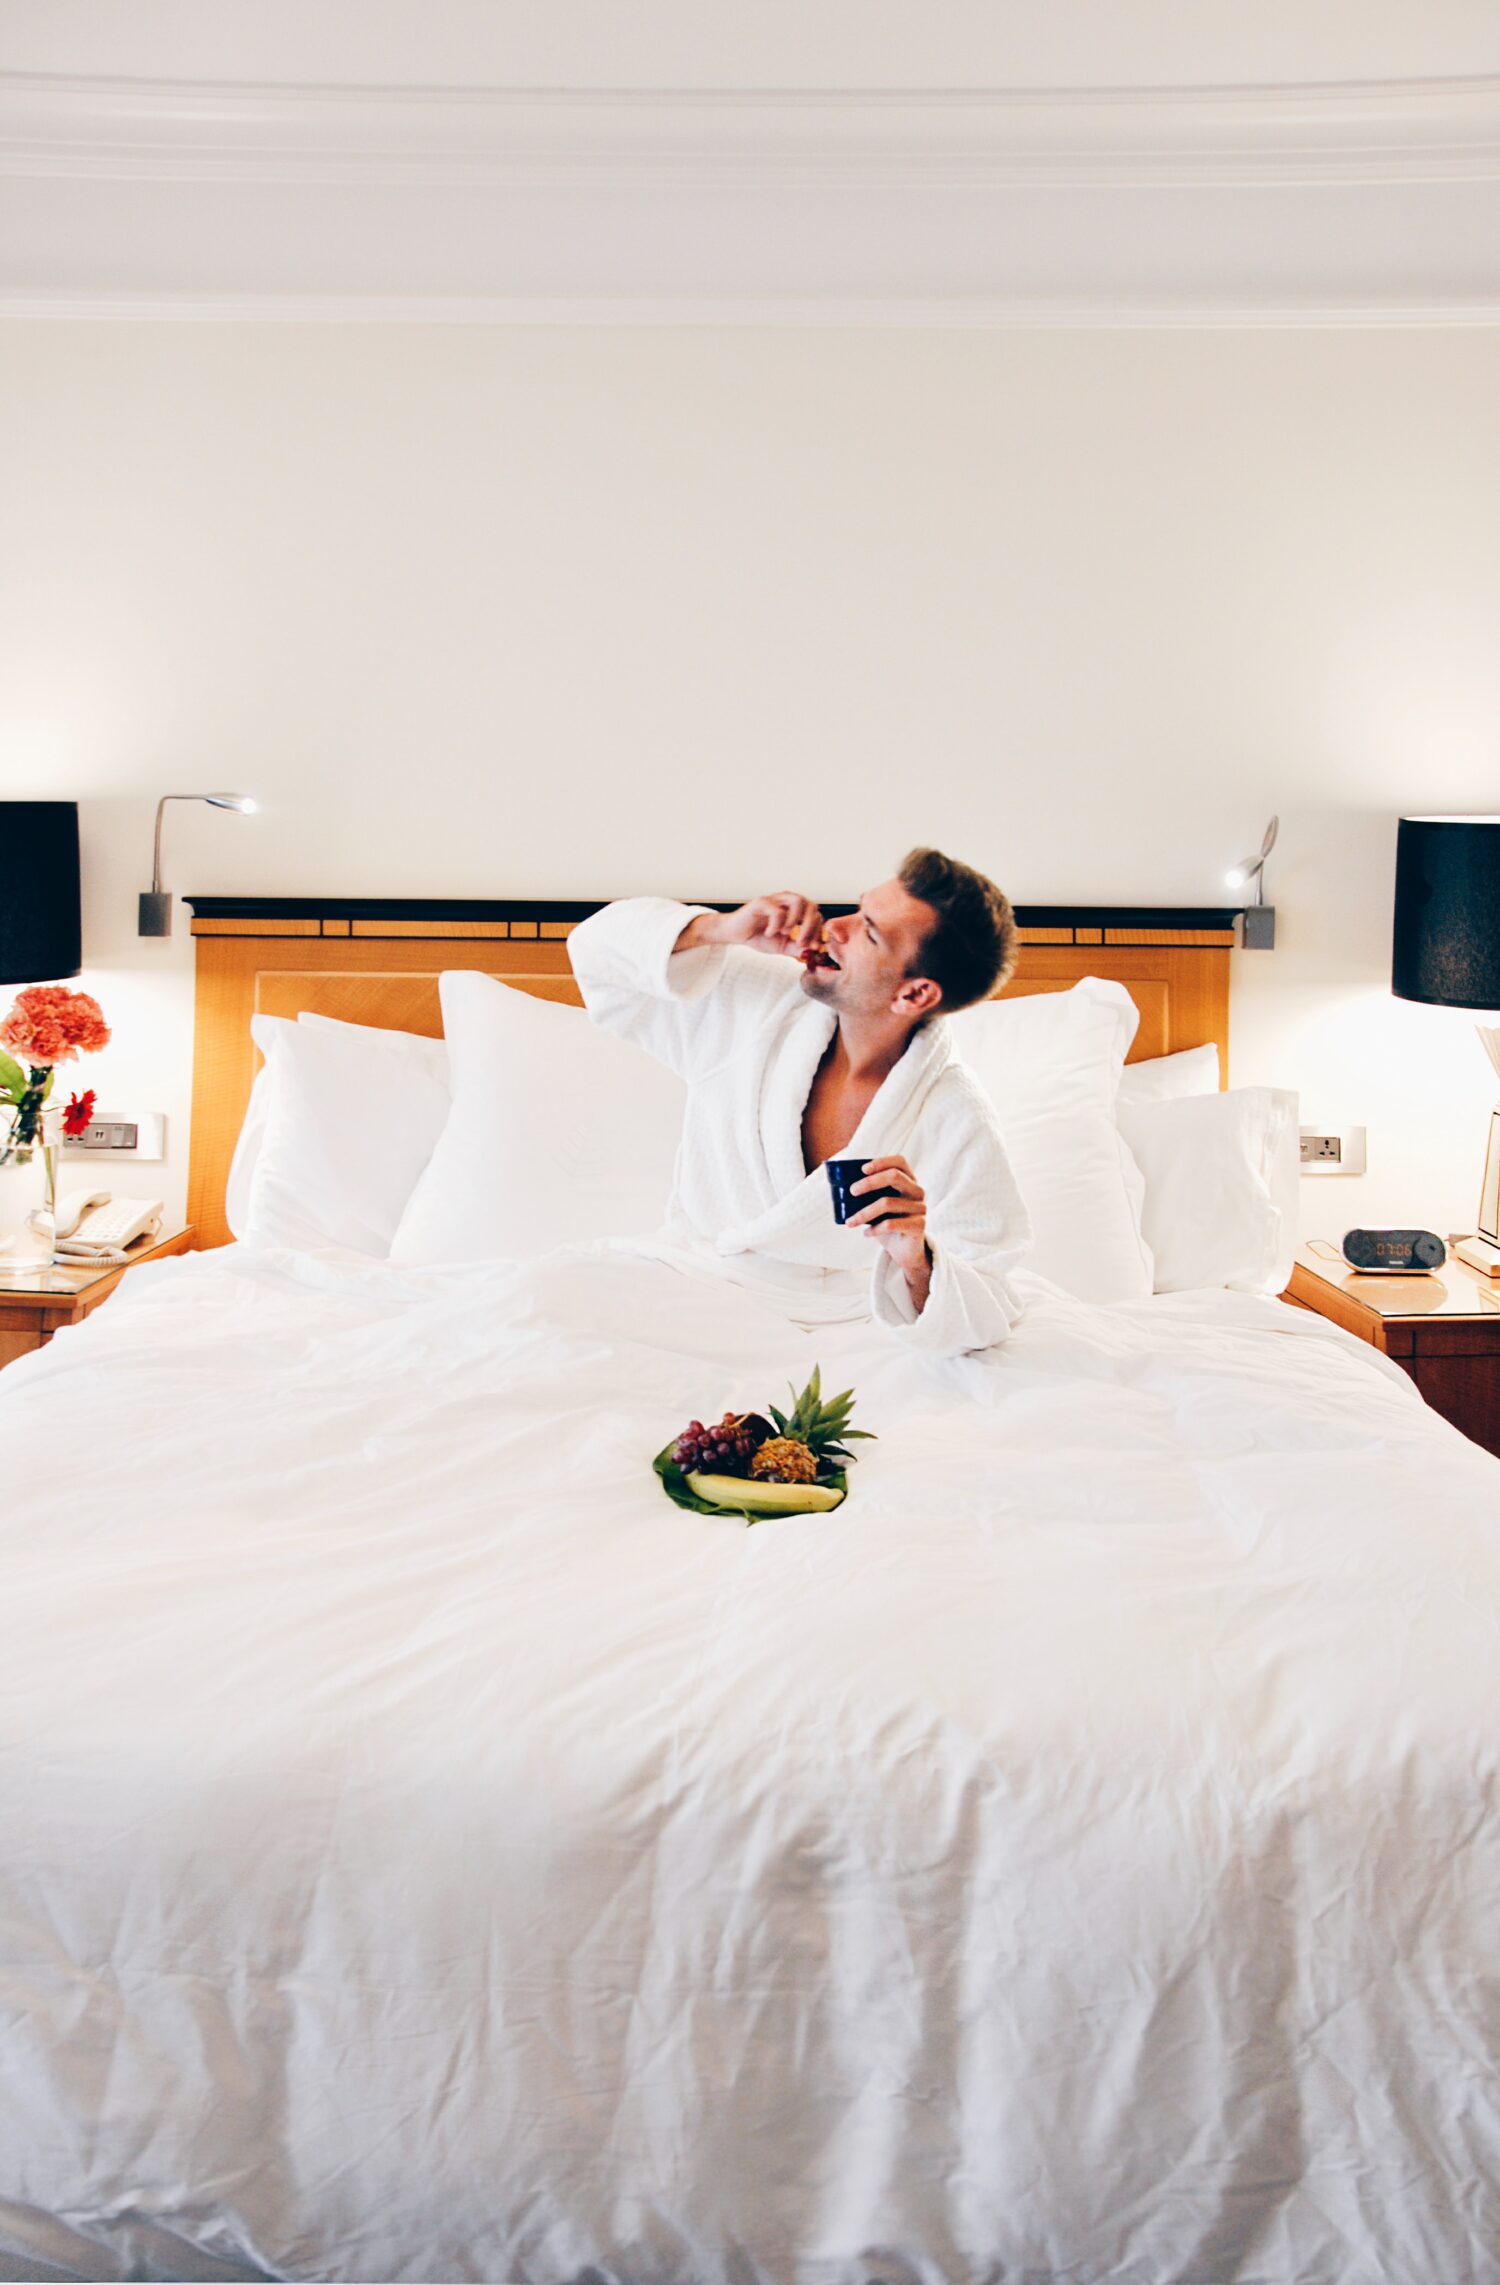 Room service: exploring investment opportunities in the hotel